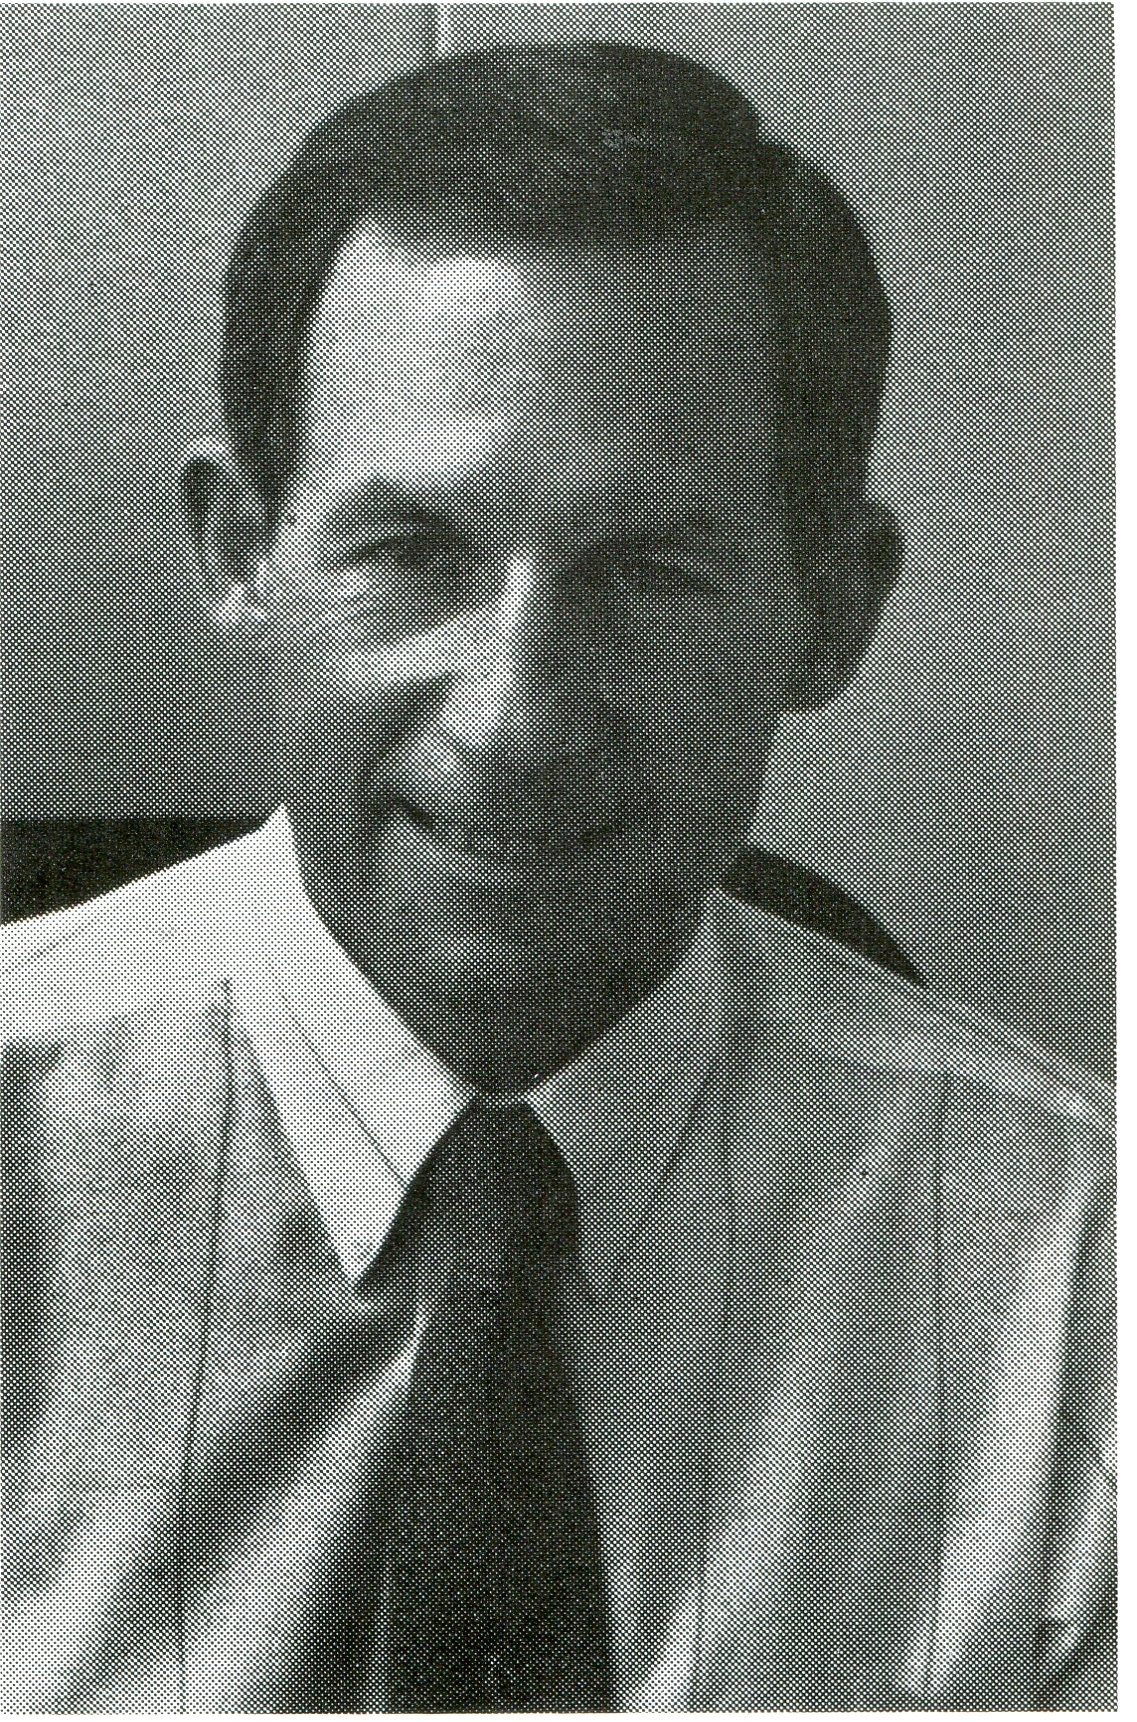 a black and white photo of a man in a shirt and tie